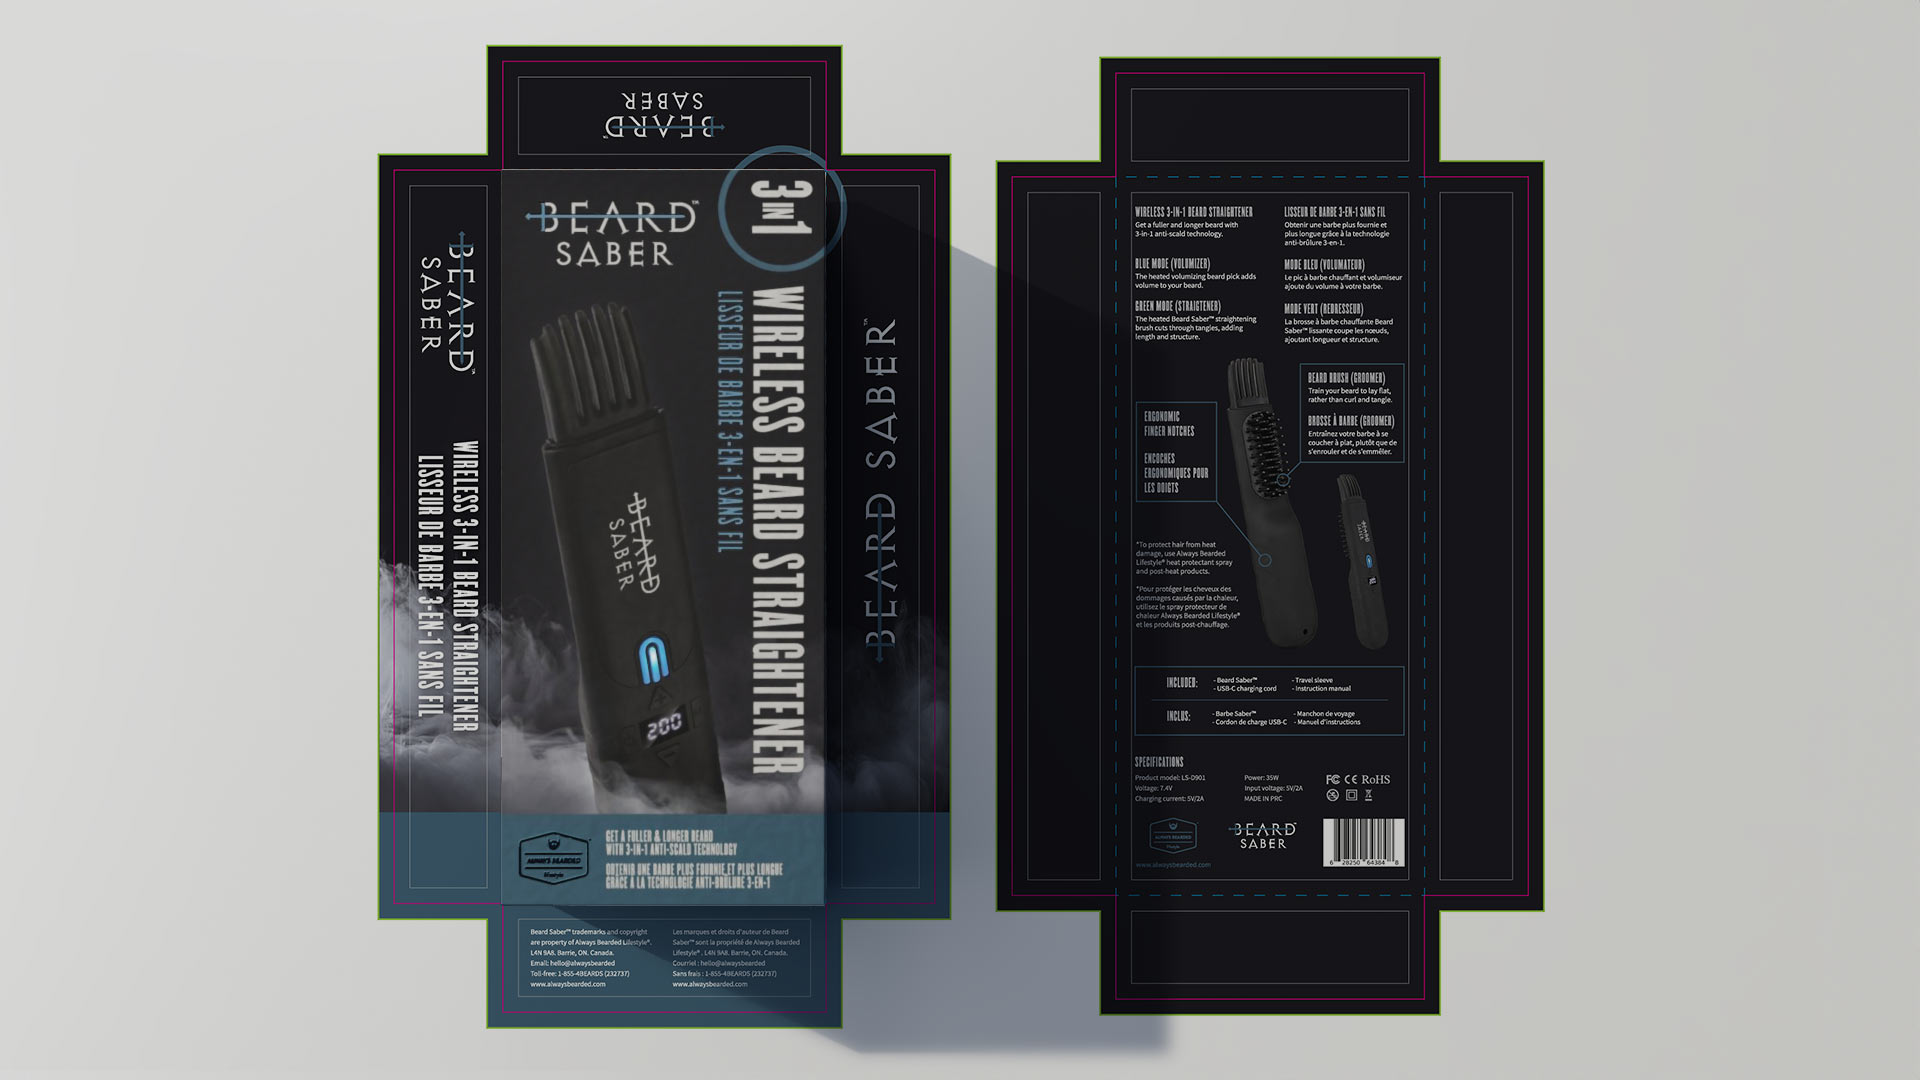 beard saber package design and 3d rendering by anthony mika